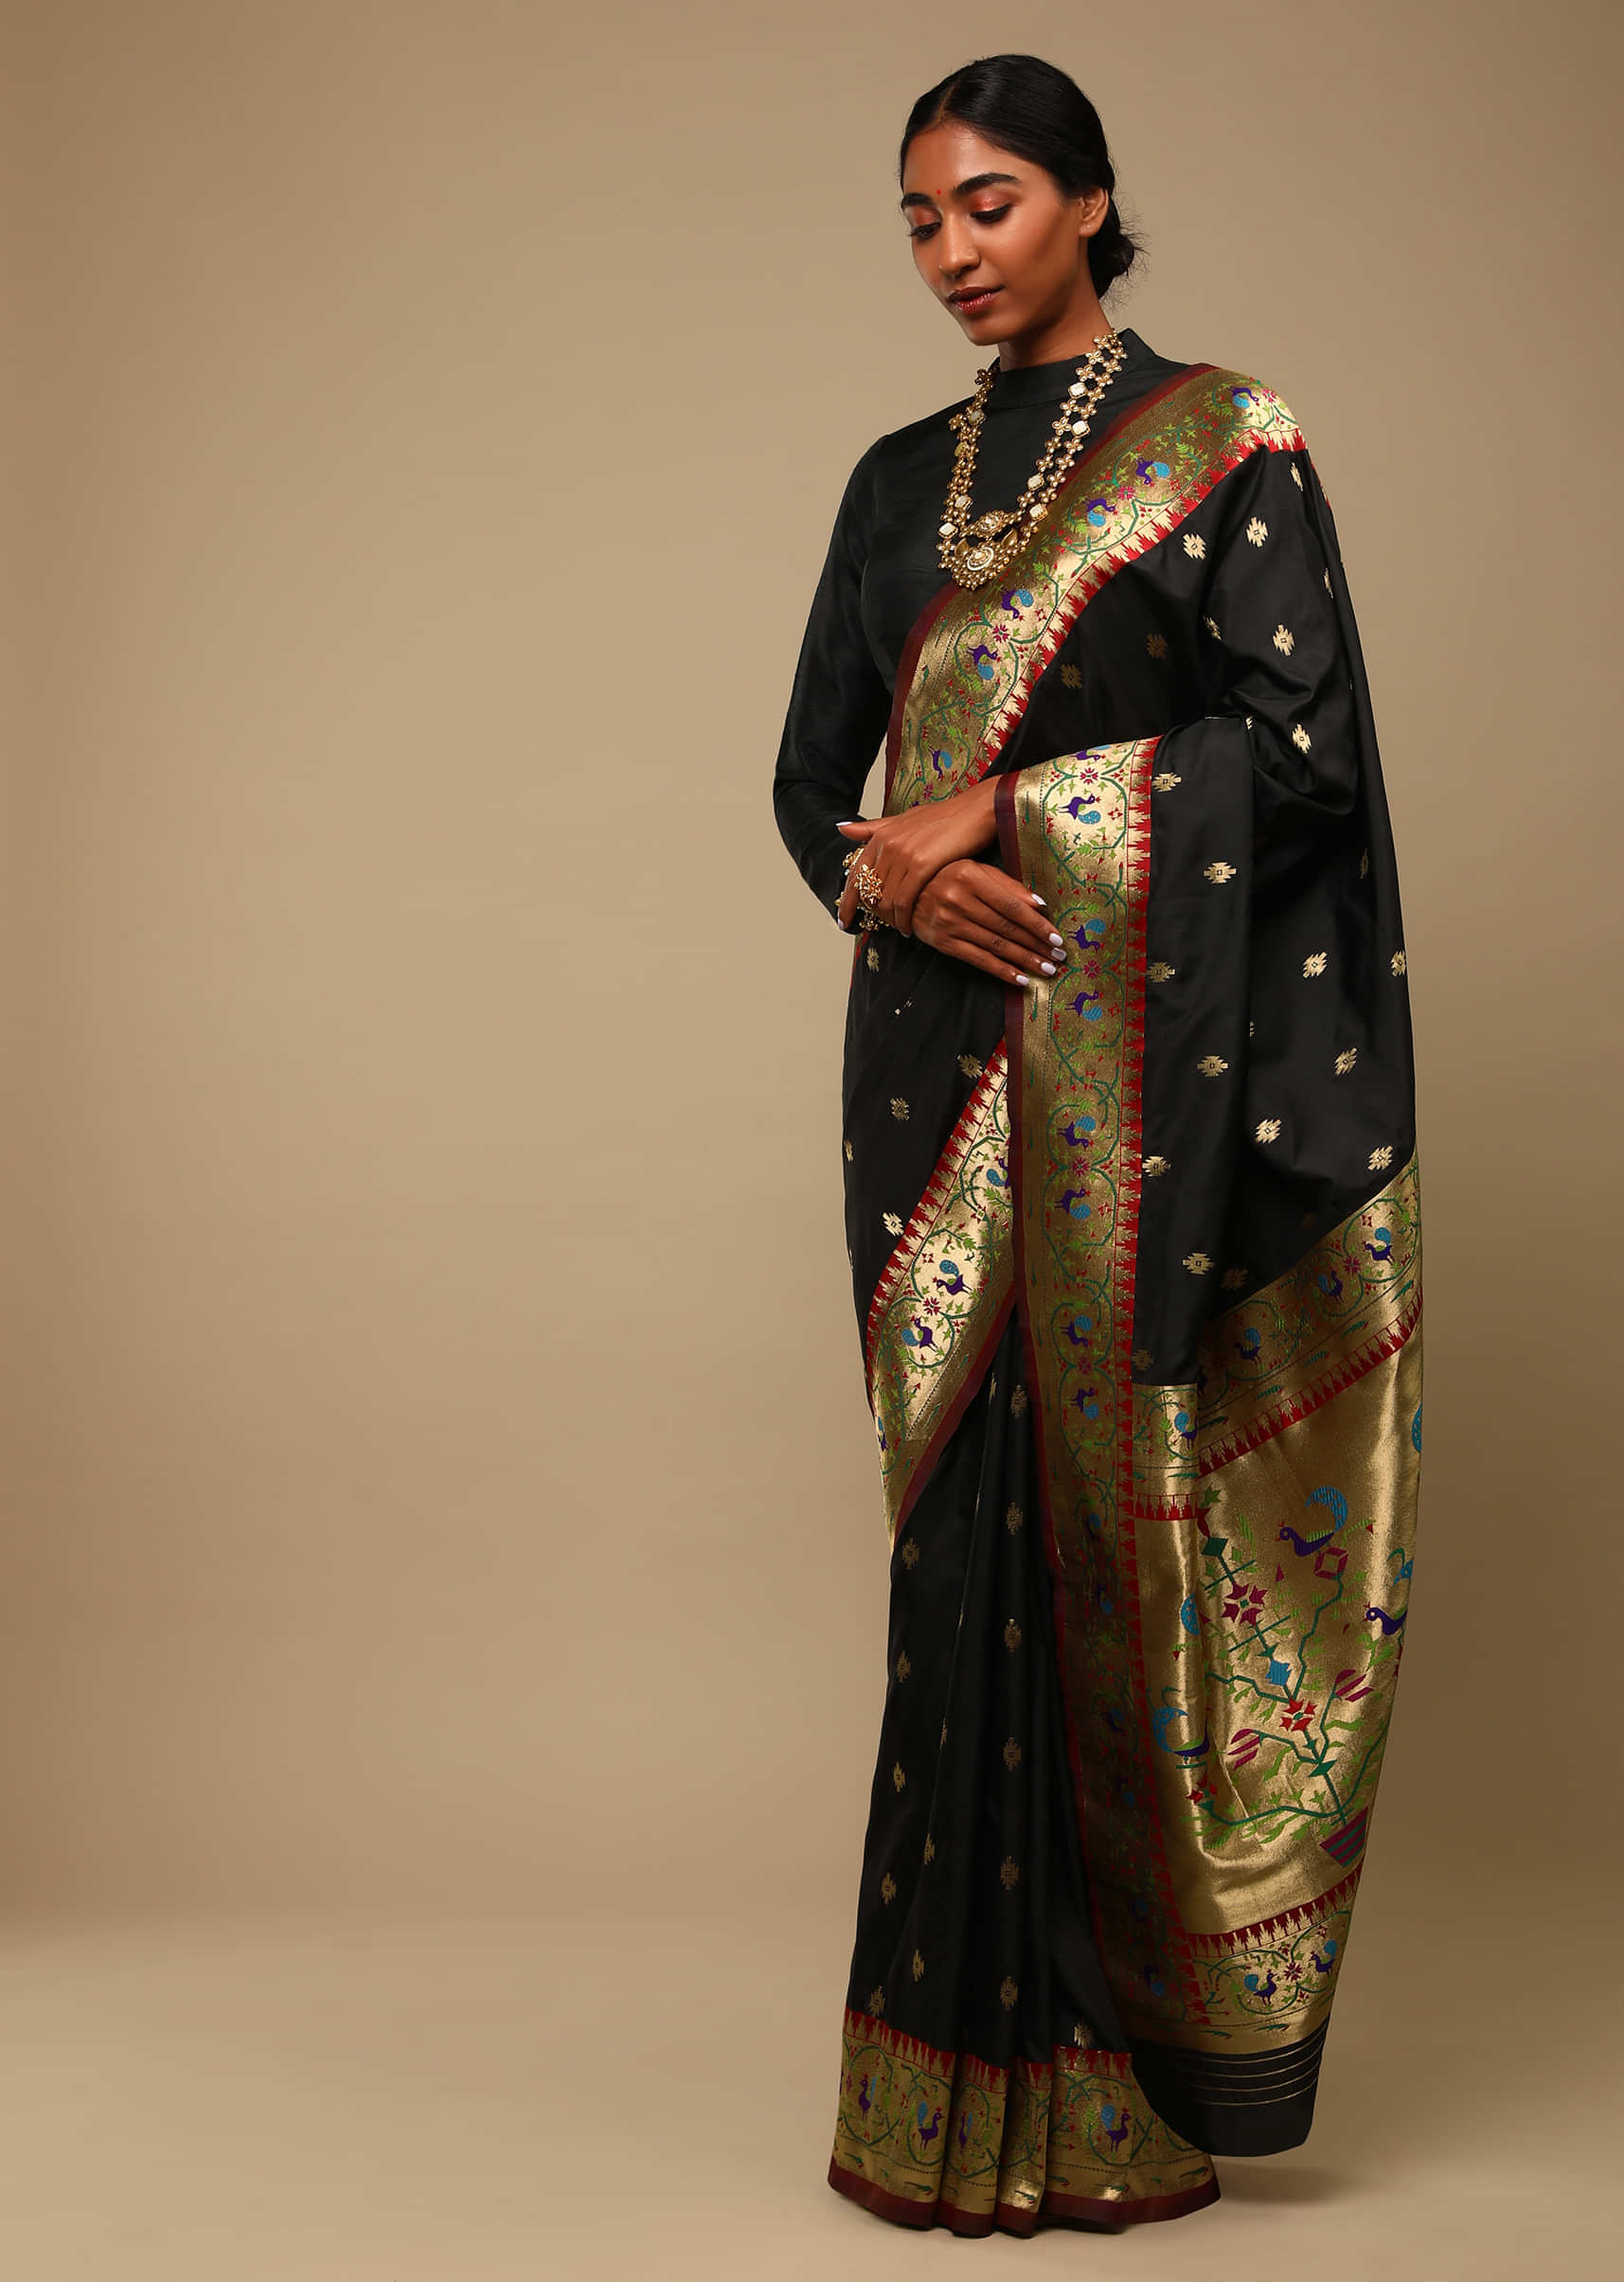 Black Saree In Art Handloom Silk With Woven Geometric Buttis, Peacock Motifs On The Border And Unstitched Blouse  